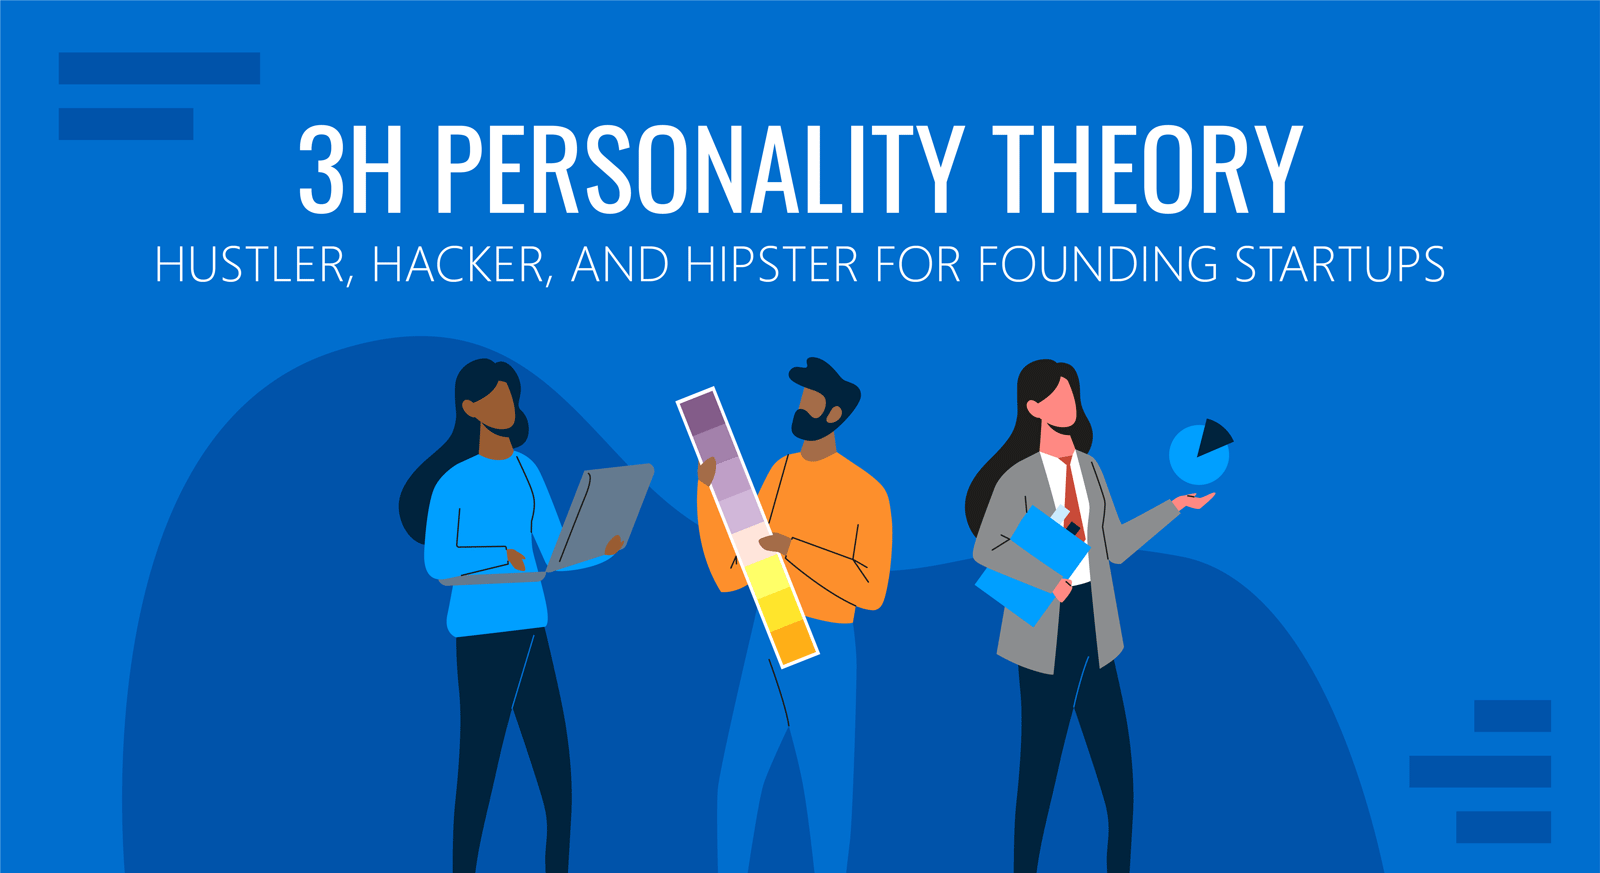 3H Personality Theory: Hustler, Hacker, and Hipster for Founding Startups